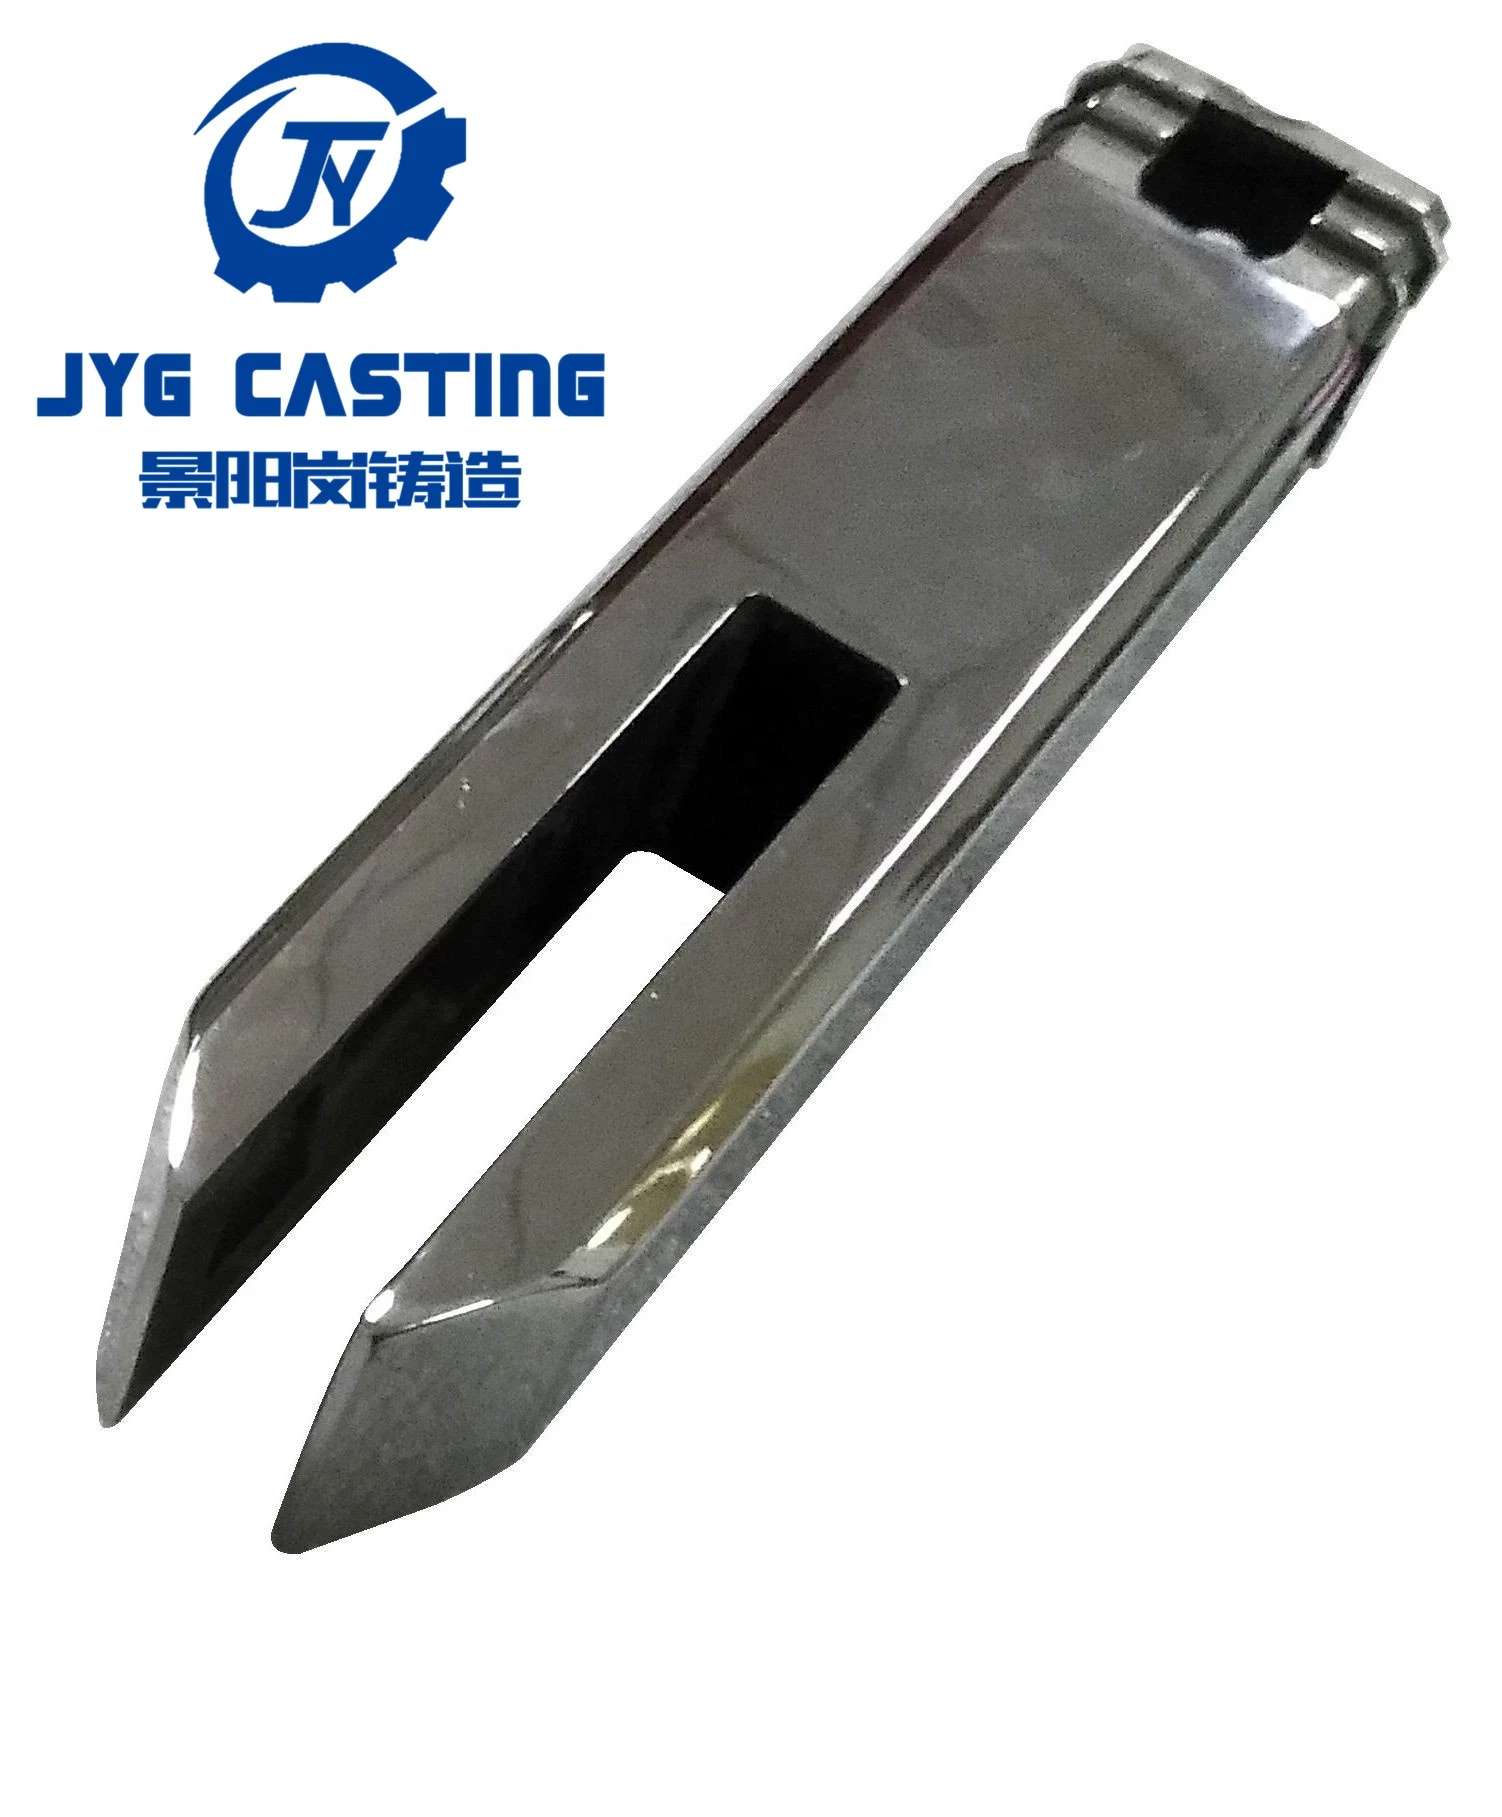 OEM Precision Casting Stainless Steel Marine Hardware Boat Accessories by JYG Casting